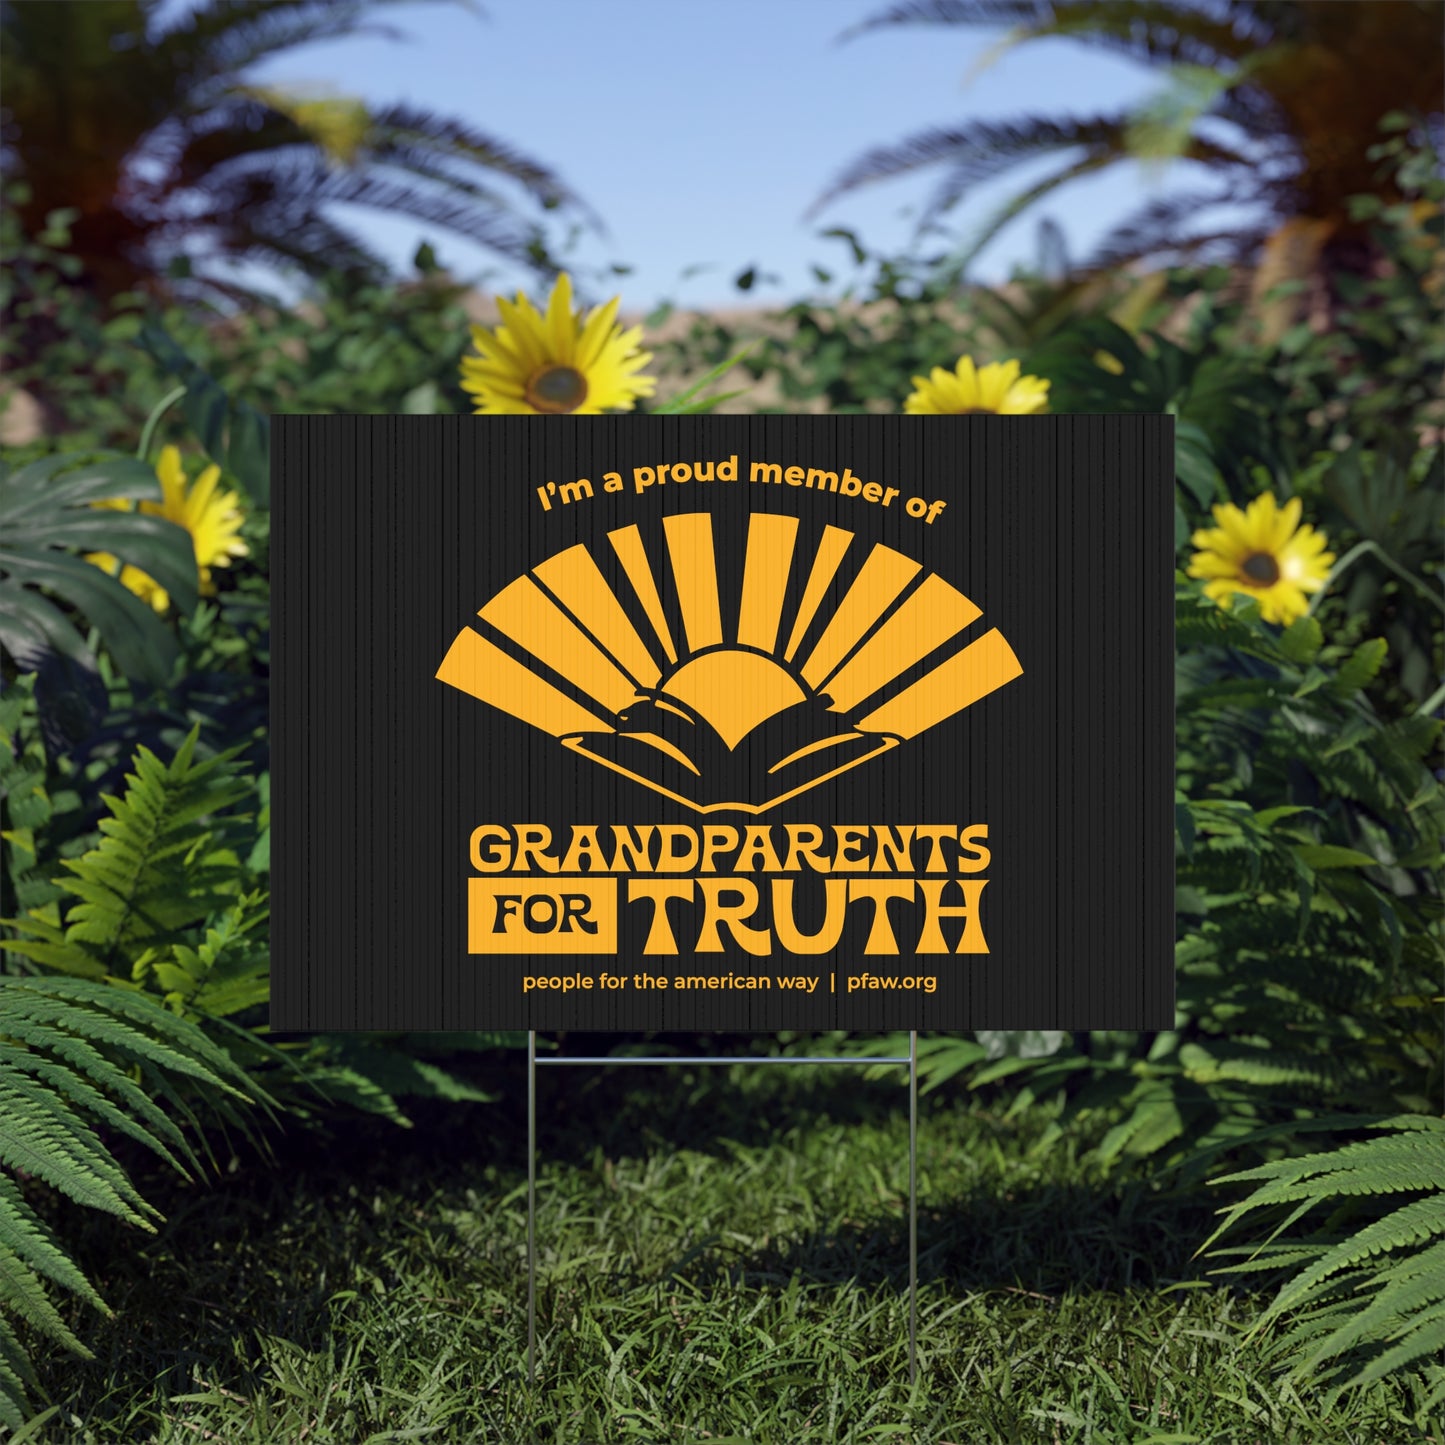 Grandparents For Truth Lawn Sign - Black & Gold